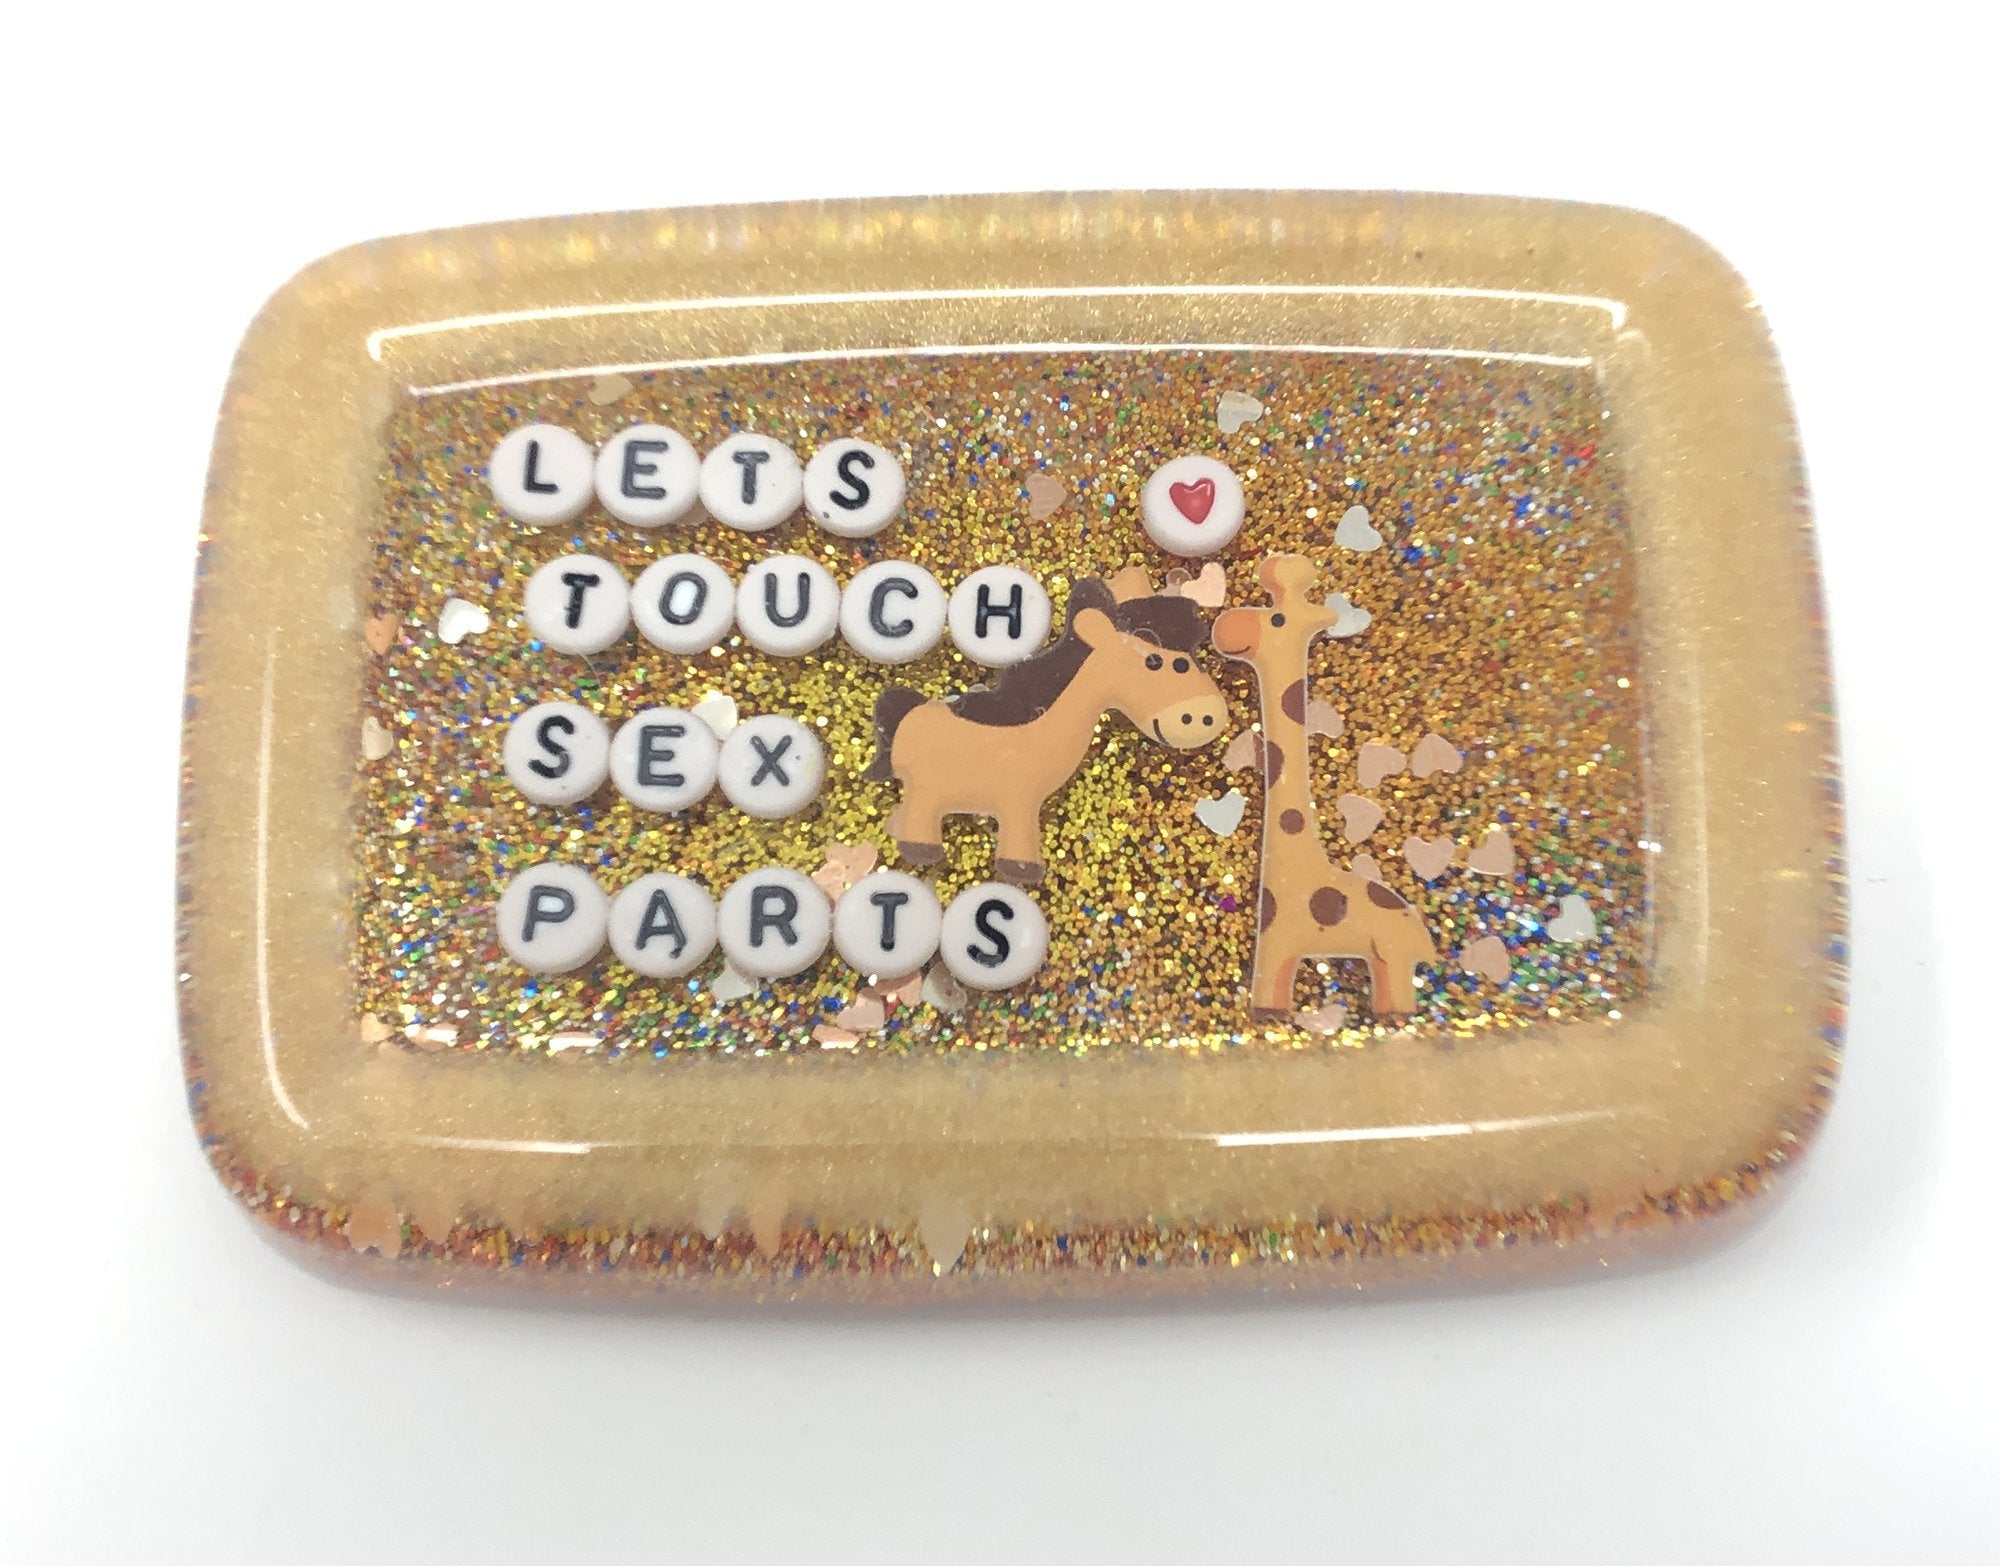 Let's Touch Sex Parts - Shower Art - READY TO SHIP